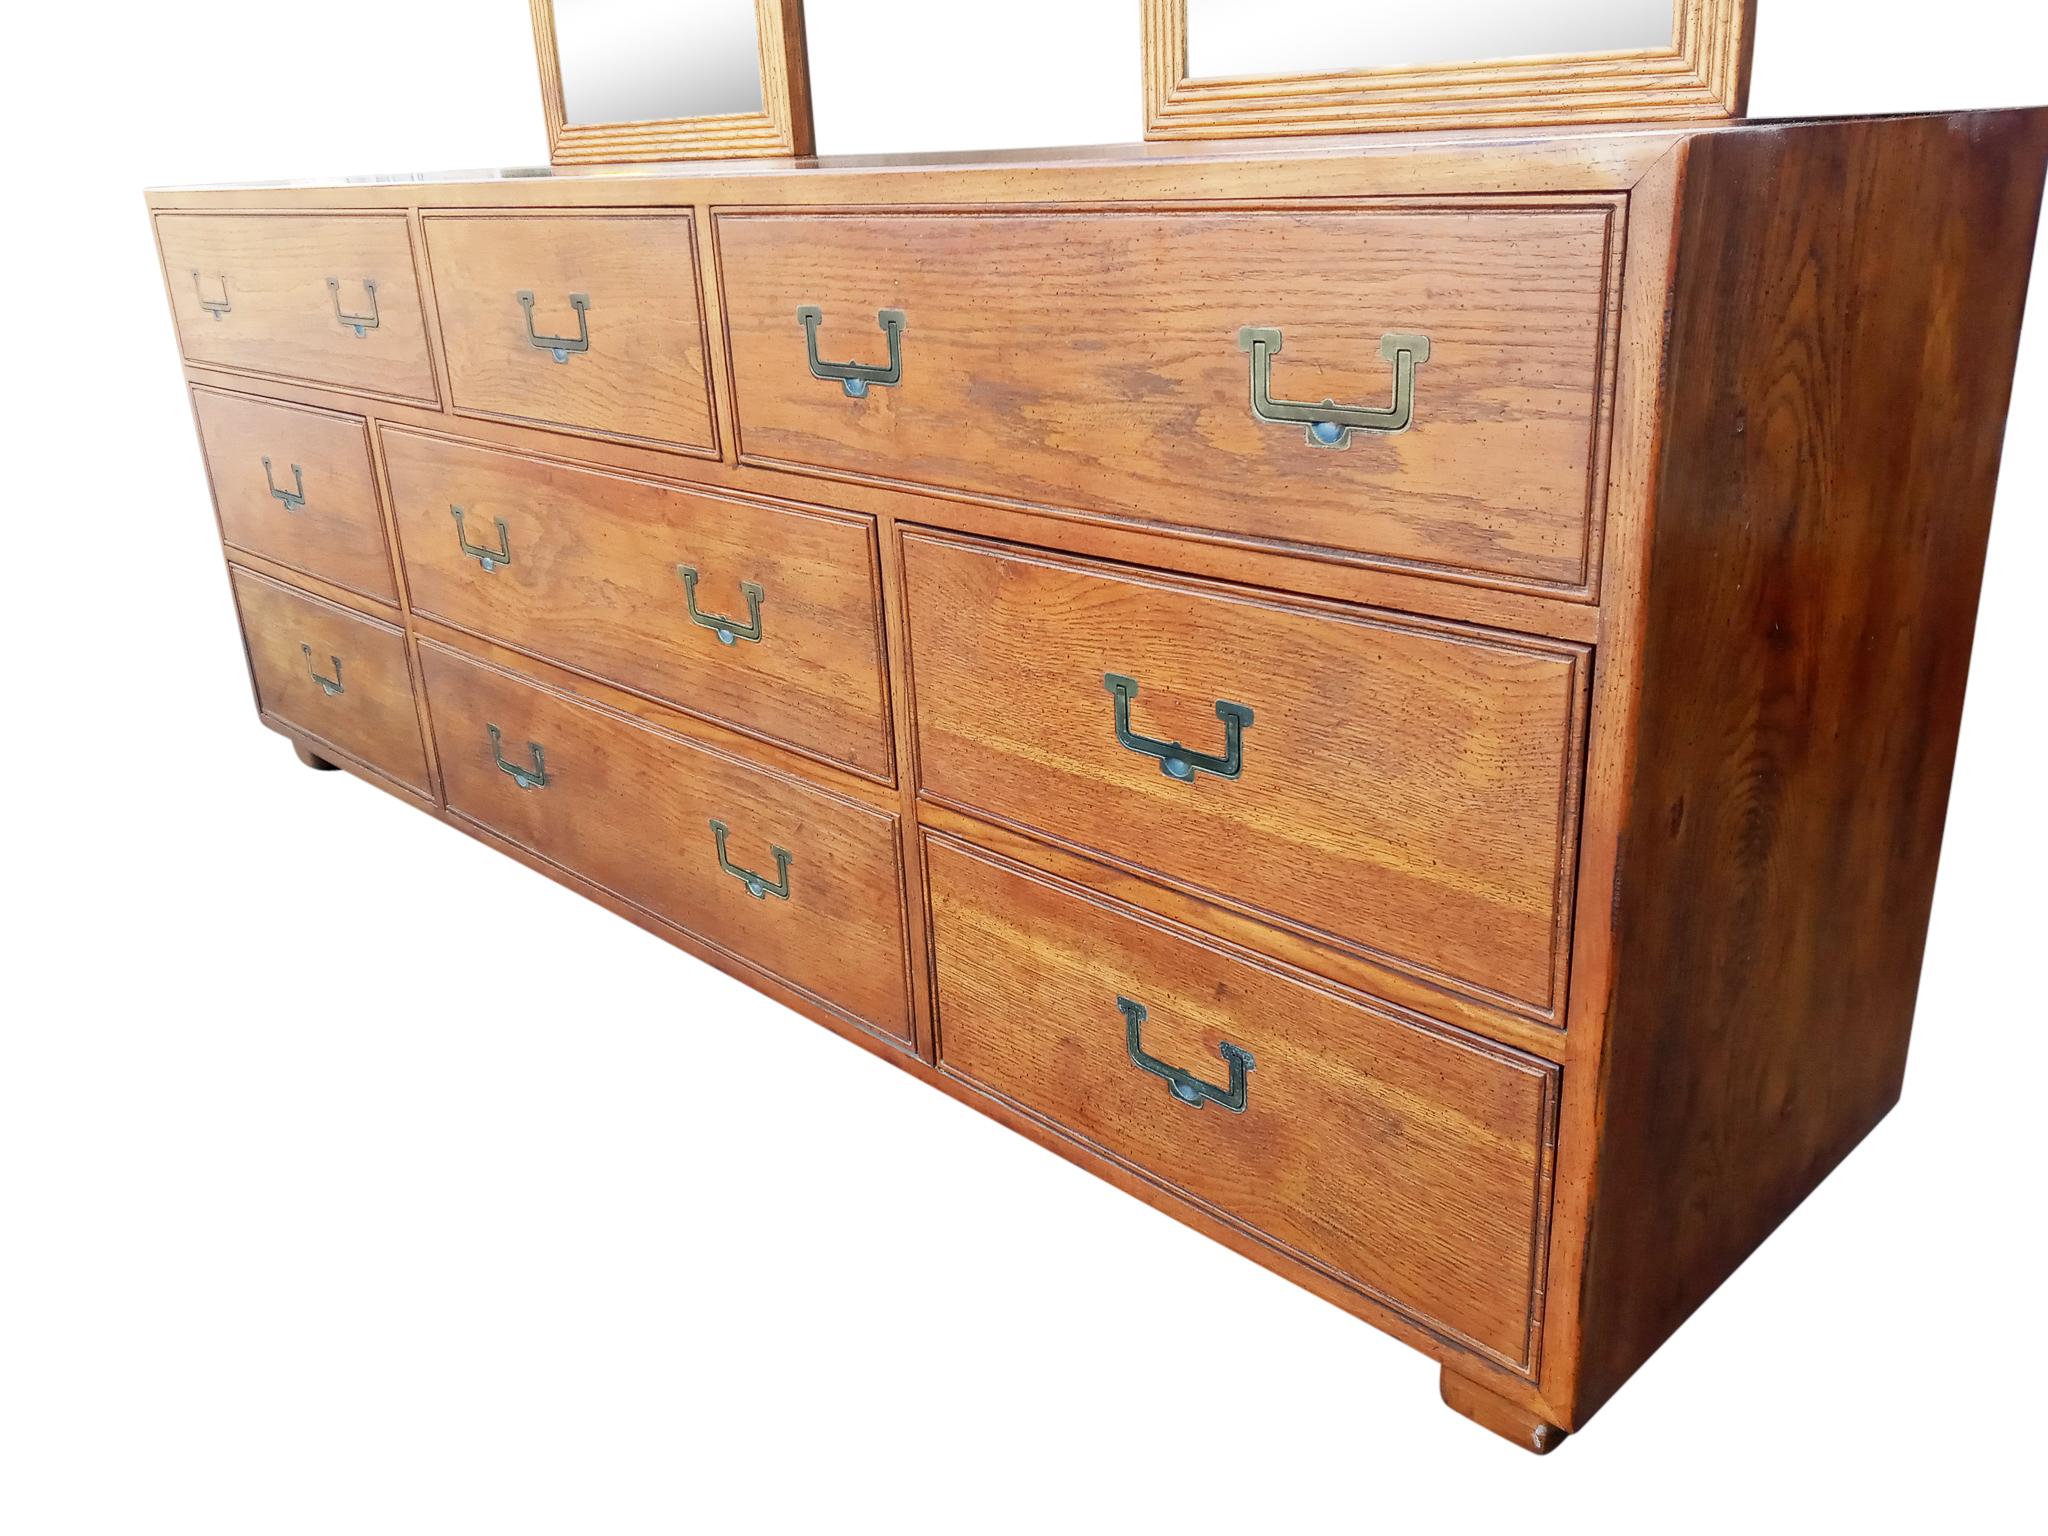 Heirloom-quality Mid-Century Modern long dresser with mirrors by Henredon, part of the Artefacts collection. Features nine drawers and a pair of matched and subtly detailed attached mirrors. Finely crafted aged oak construction with laquered brass